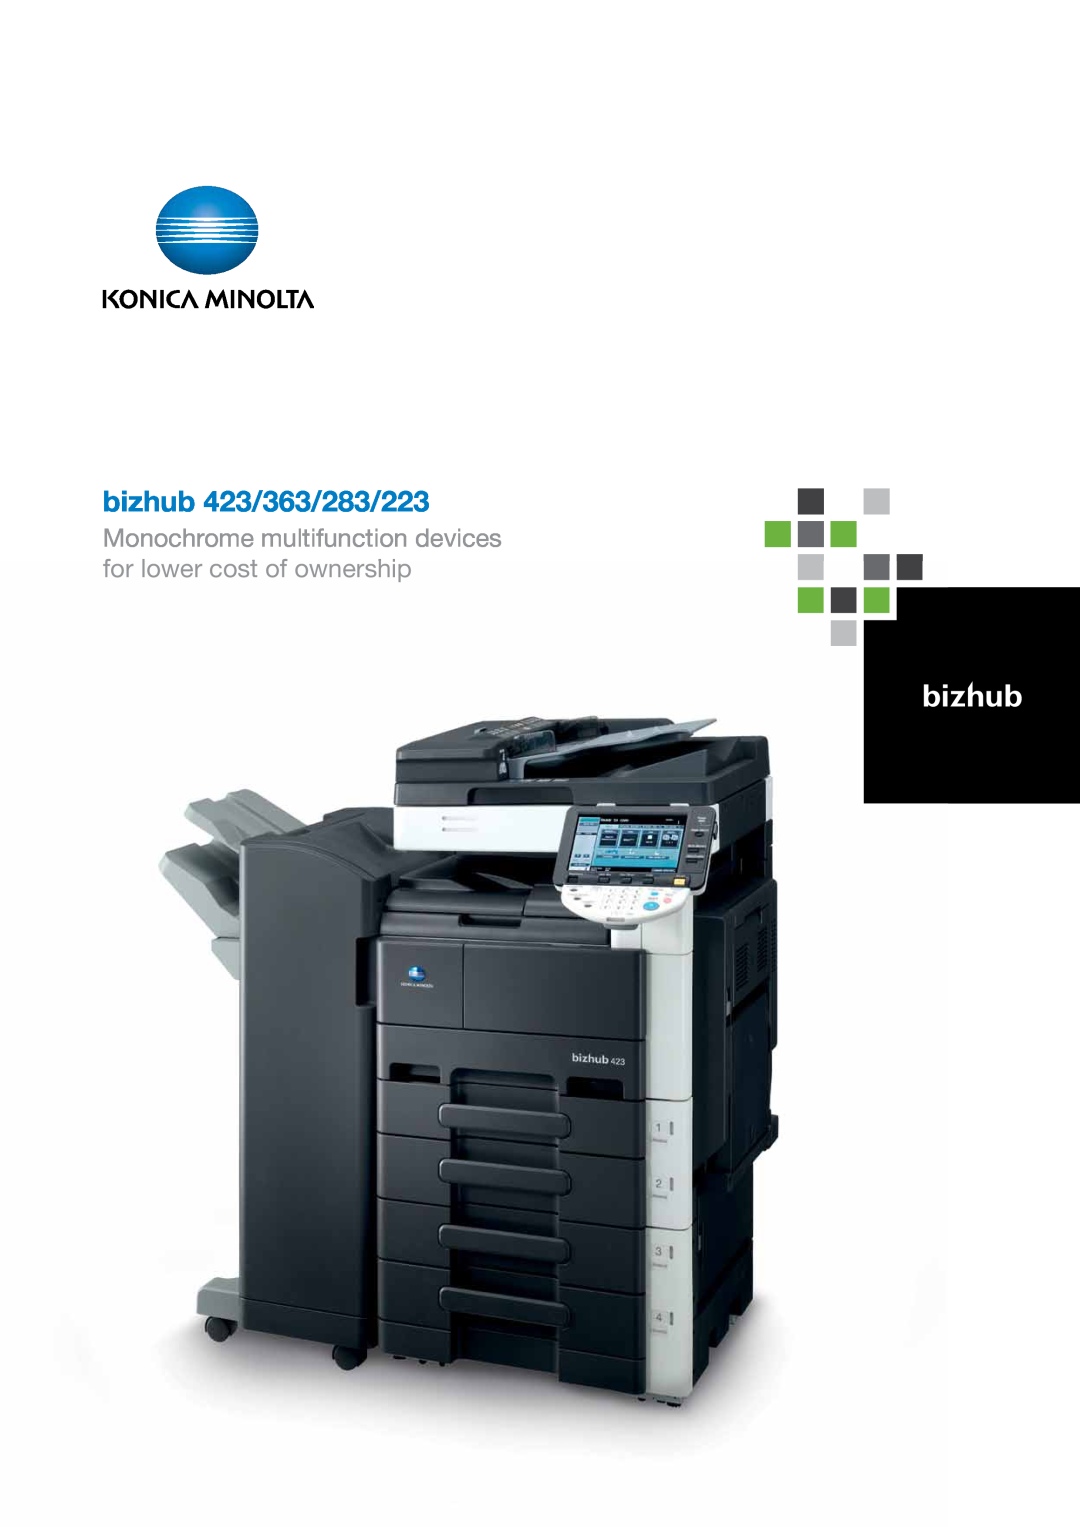 Konica Minolta manual bizhub 423/363/283/223, Monochrome multifunction devices for lower cost of ownership 